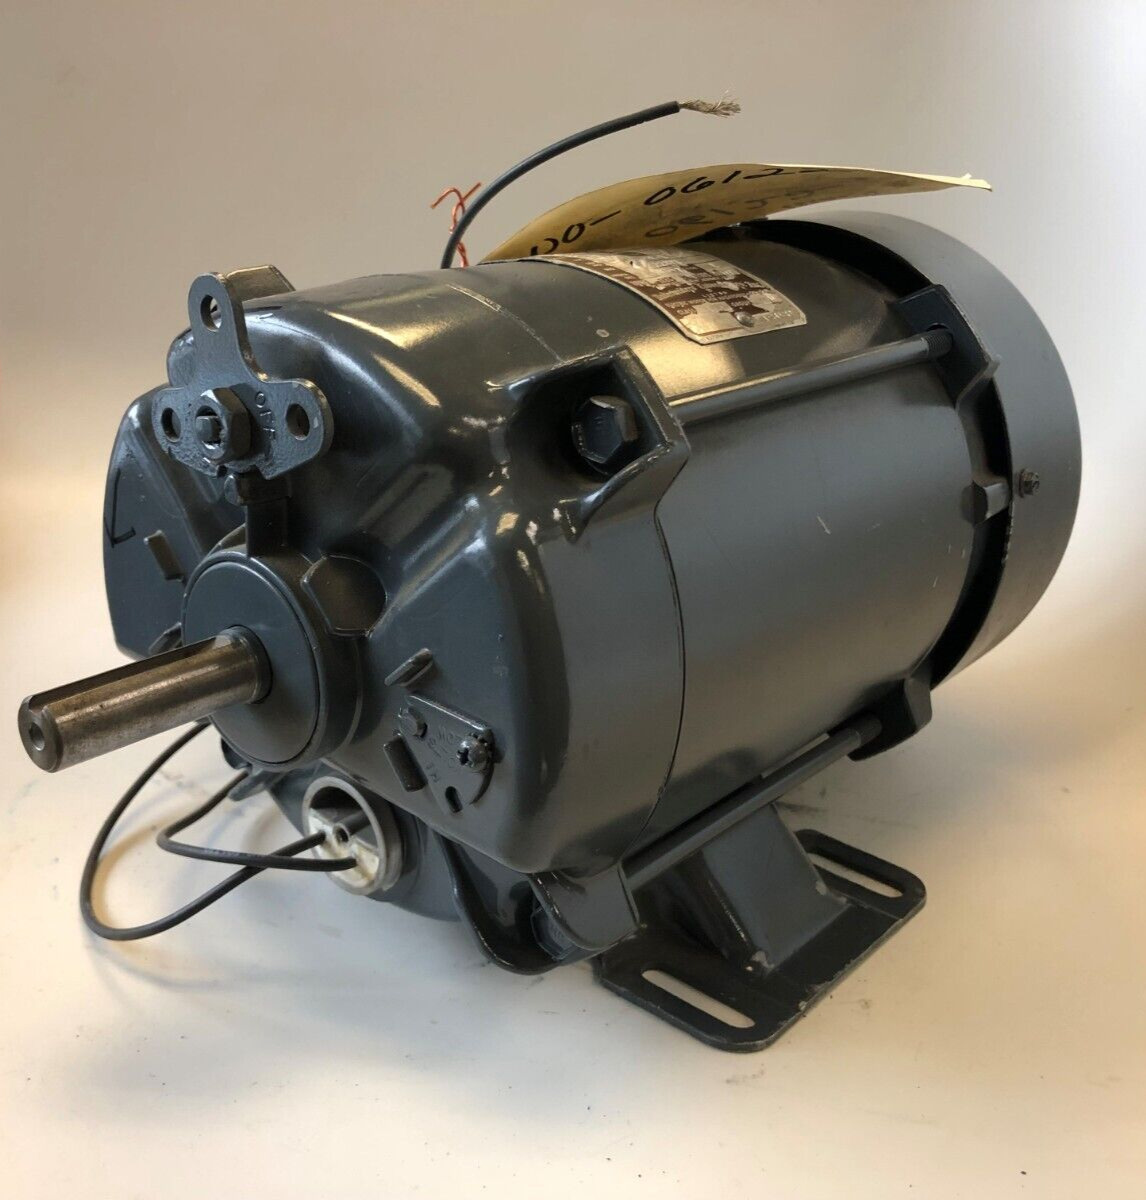 General Electric AC Explosion Proof Motor, 3/4 HP, 1725 RPM